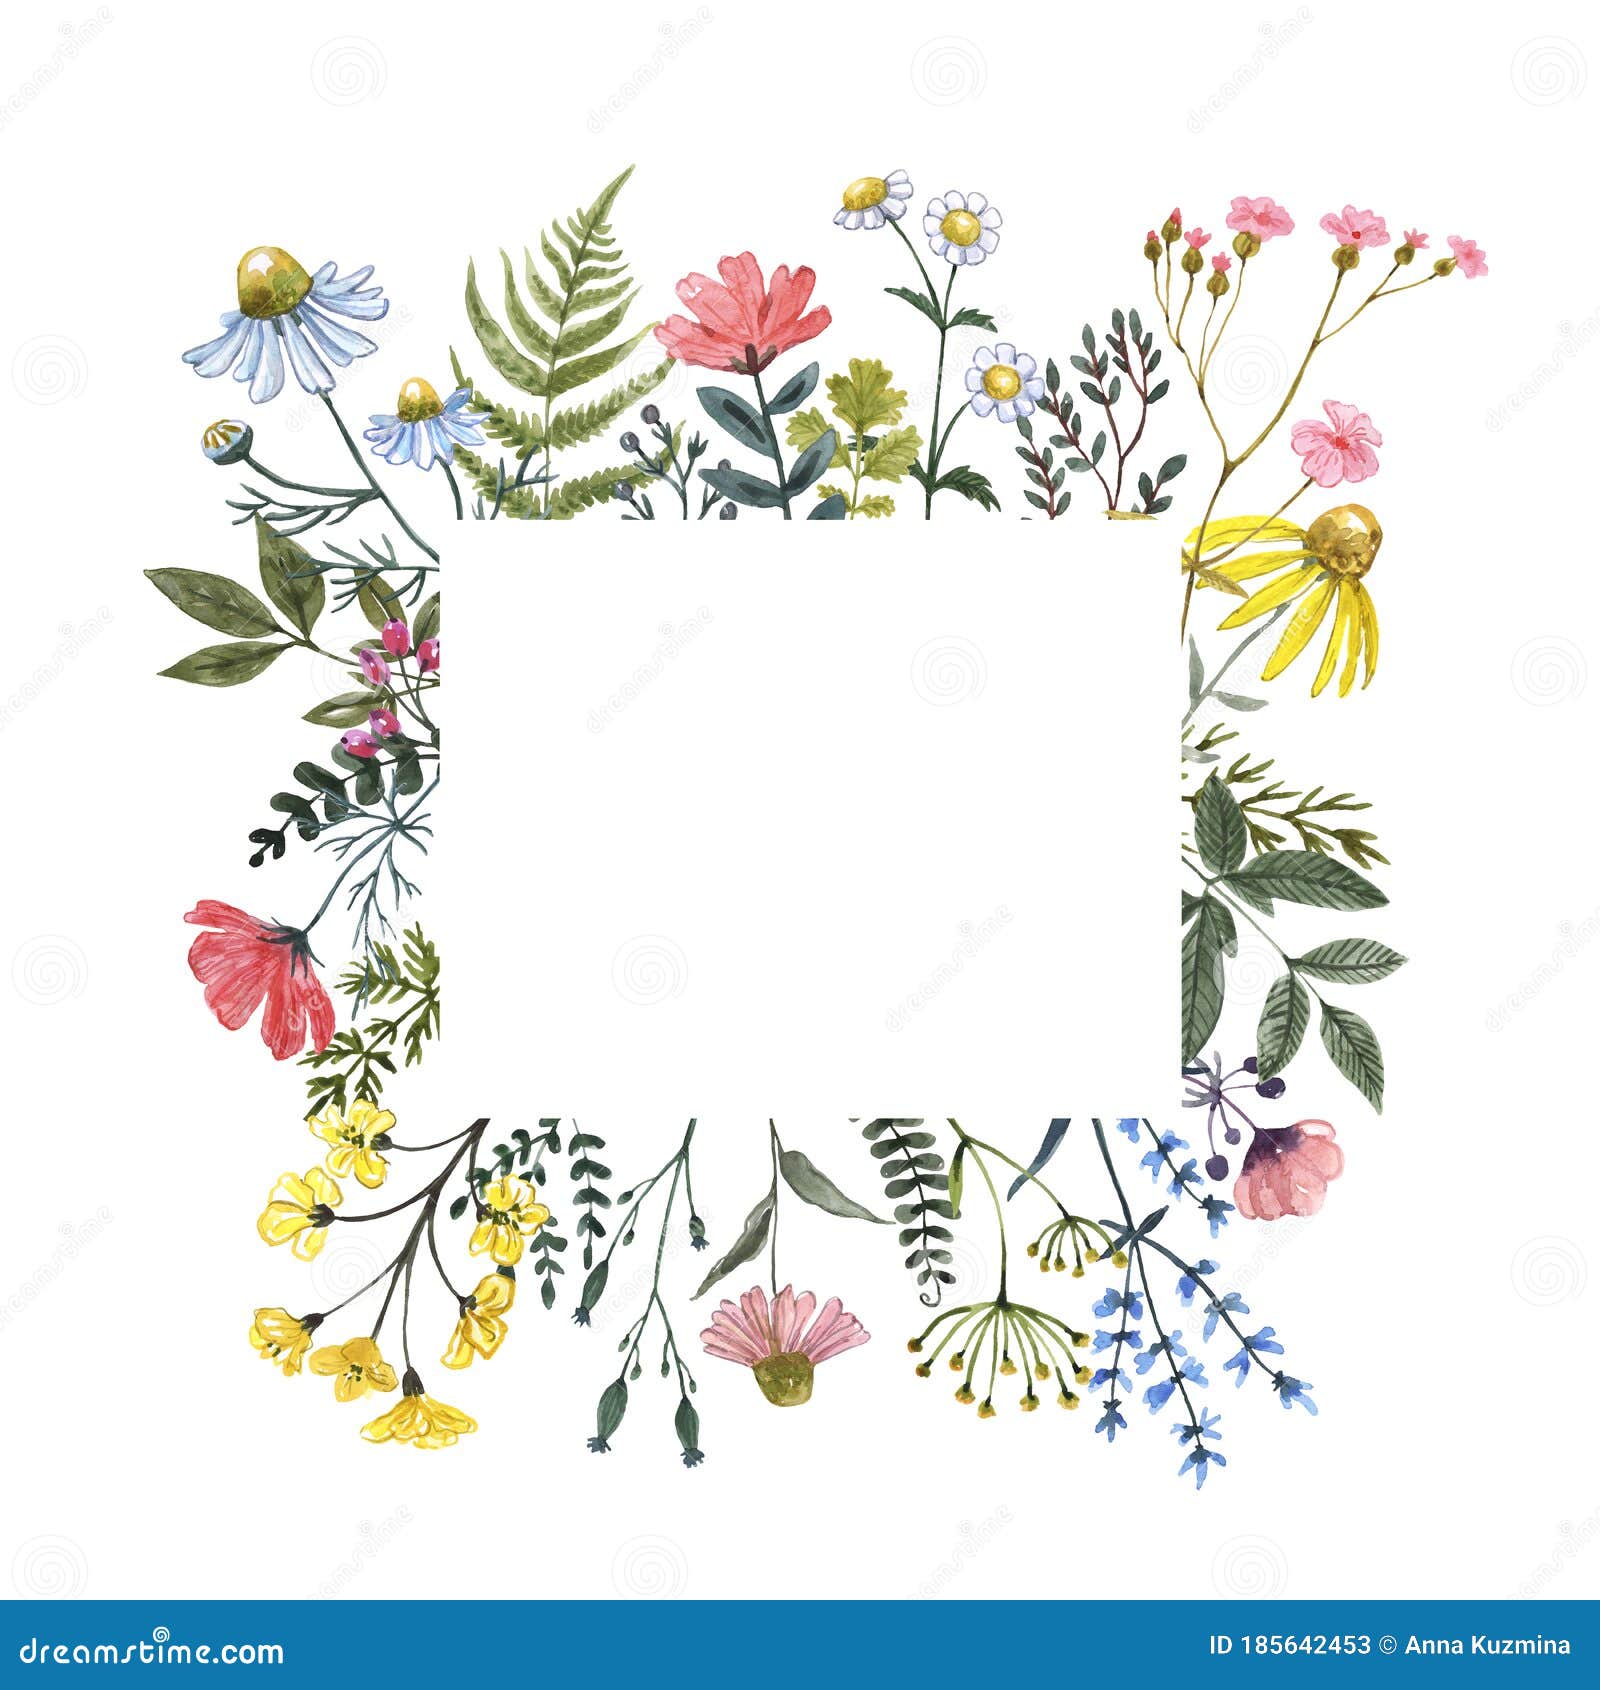 beautiful wildflower border with hand painted summer meadow flowers, herbs, grass, leaves,  on white background.